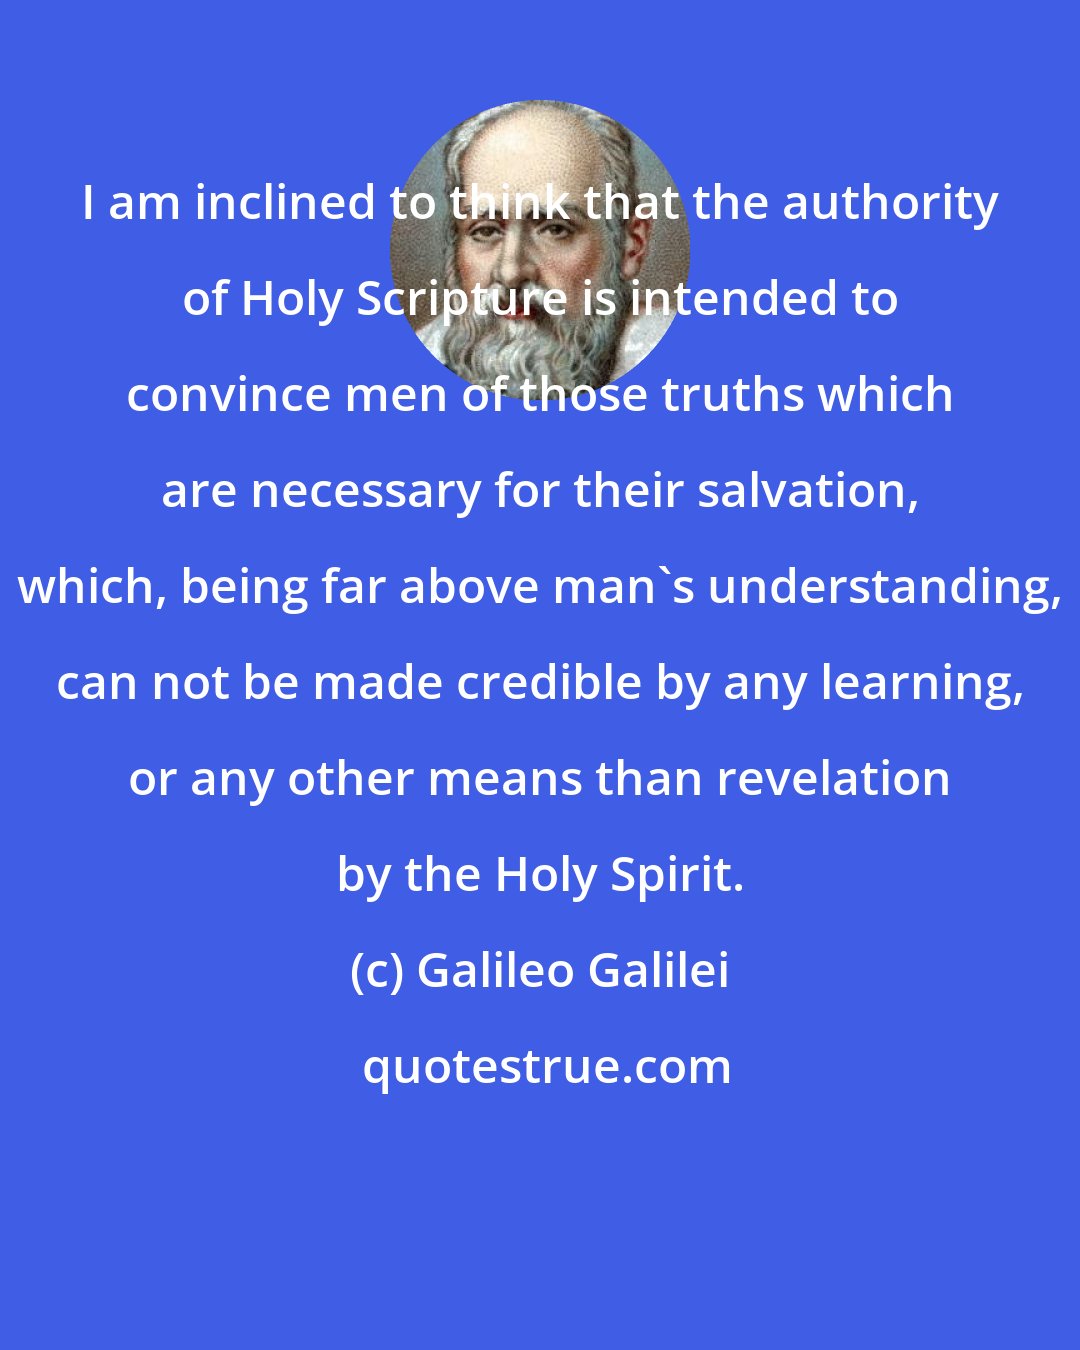 Galileo Galilei: I am inclined to think that the authority of Holy Scripture is intended to convince men of those truths which are necessary for their salvation, which, being far above man's understanding, can not be made credible by any learning, or any other means than revelation by the Holy Spirit.